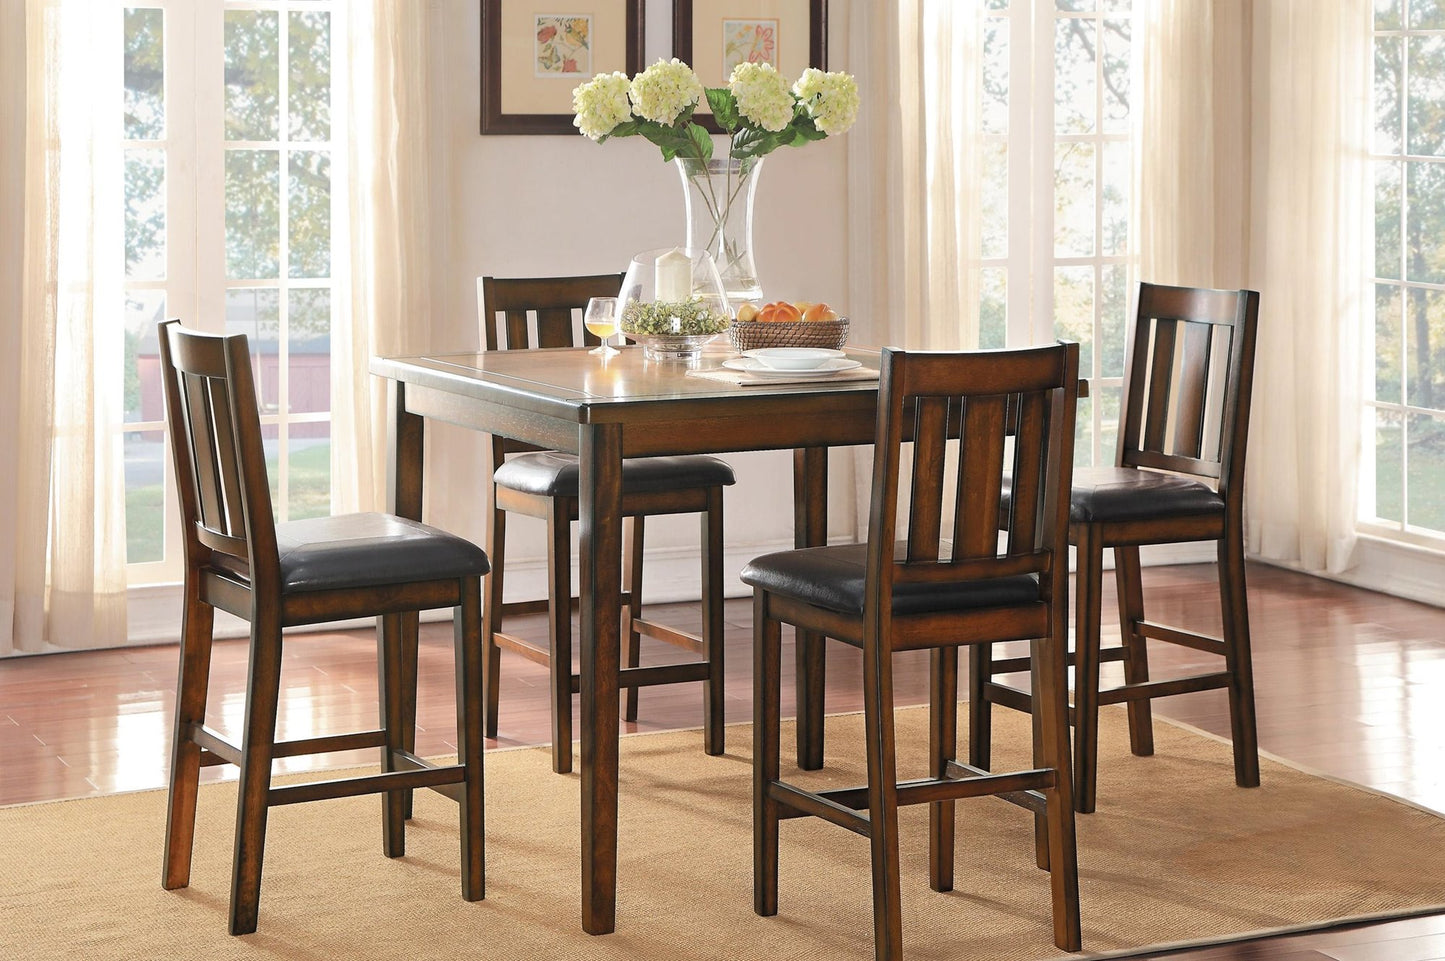 Homelegance Delmar 5PC Counter Height Dining Set Table, 4 Chair in Brown